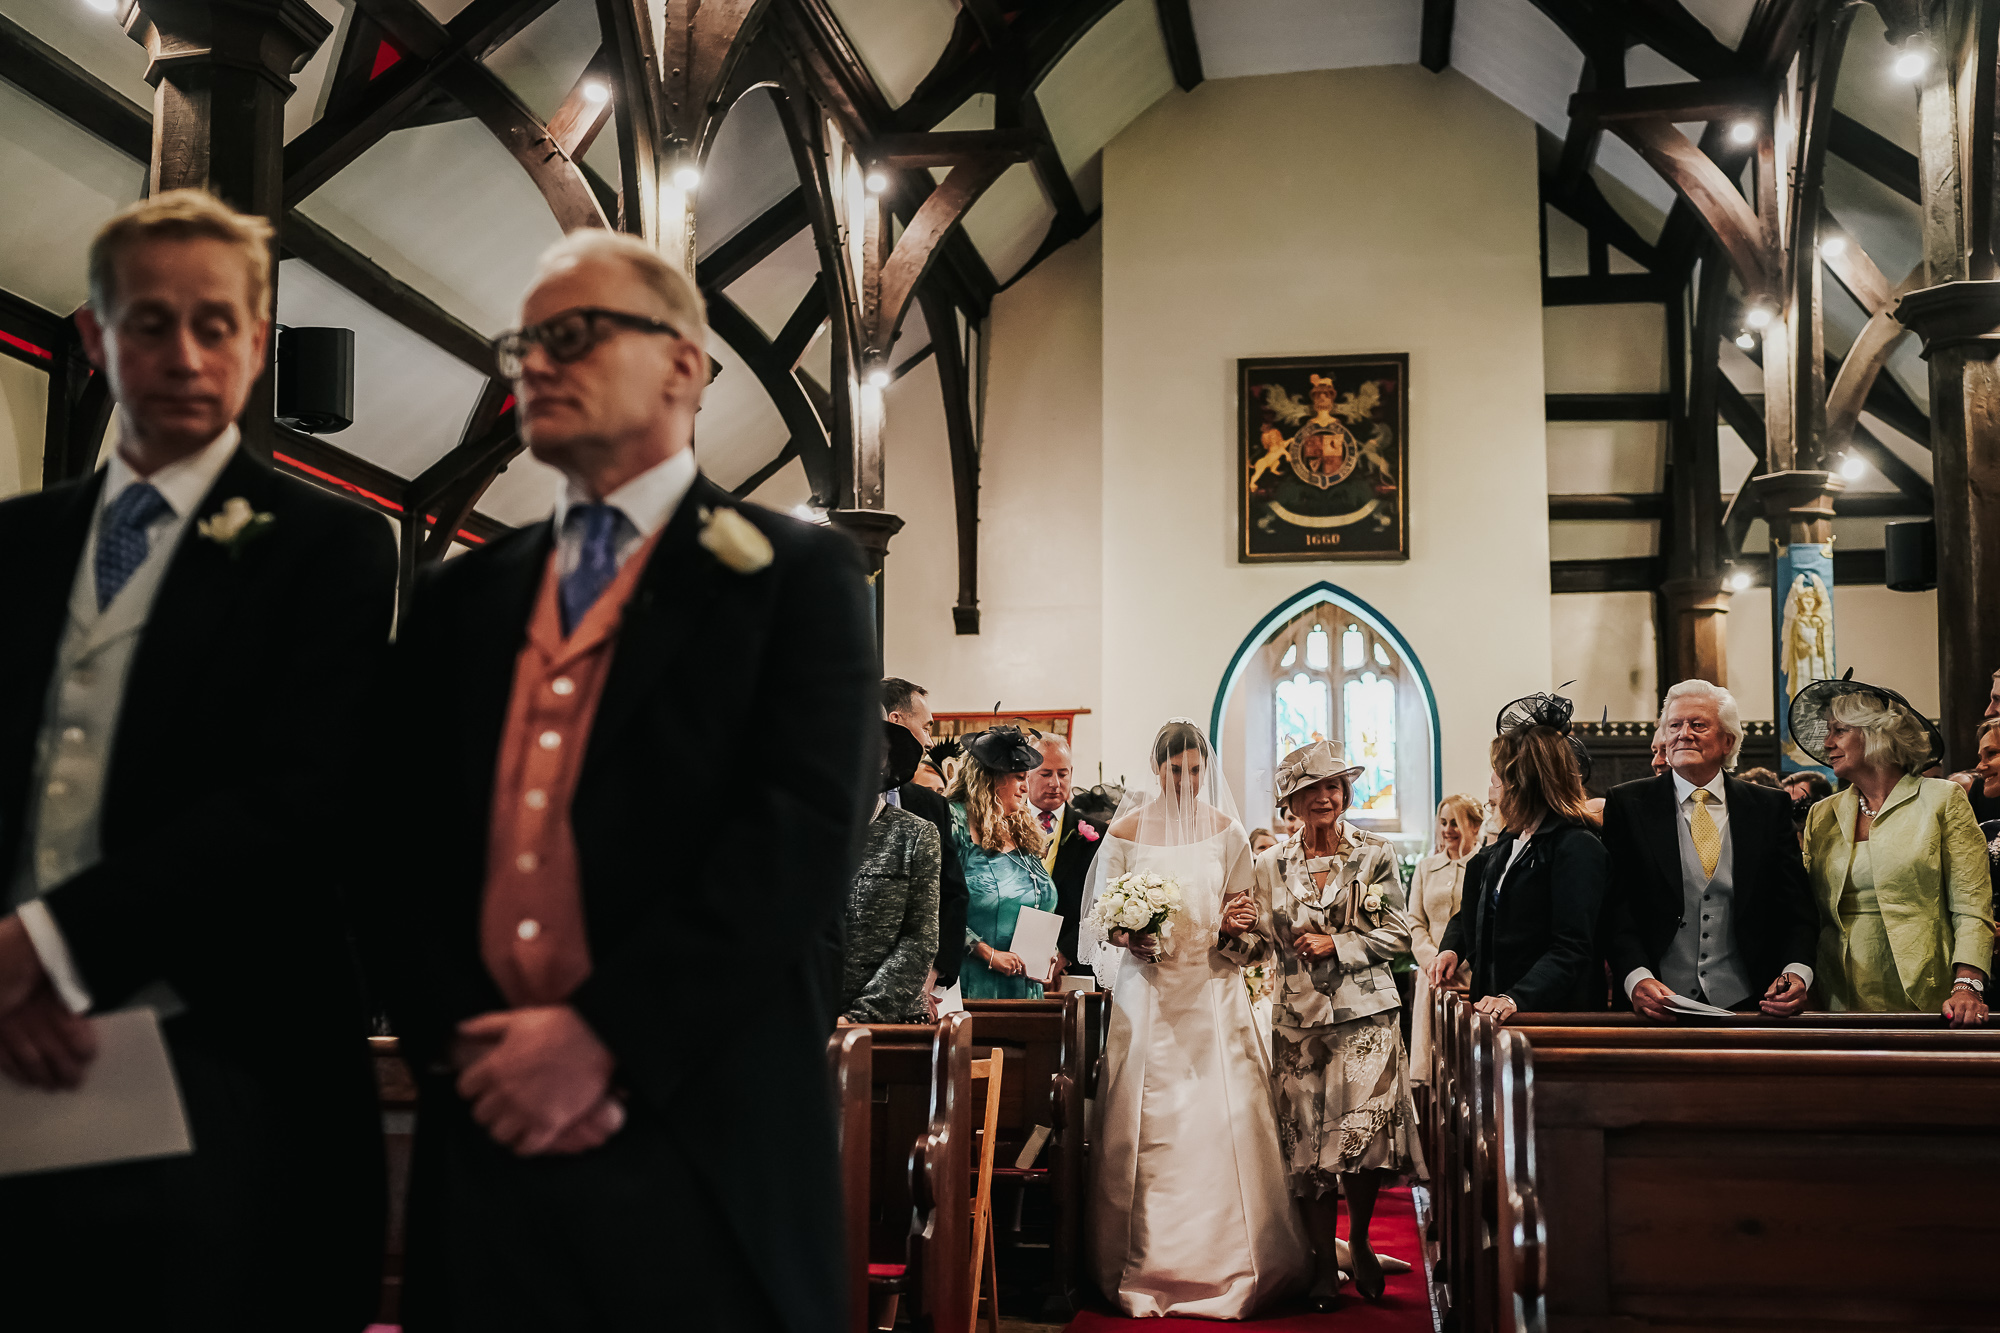 Cheshire wedding at home wedding photography (17 of 49).jpg